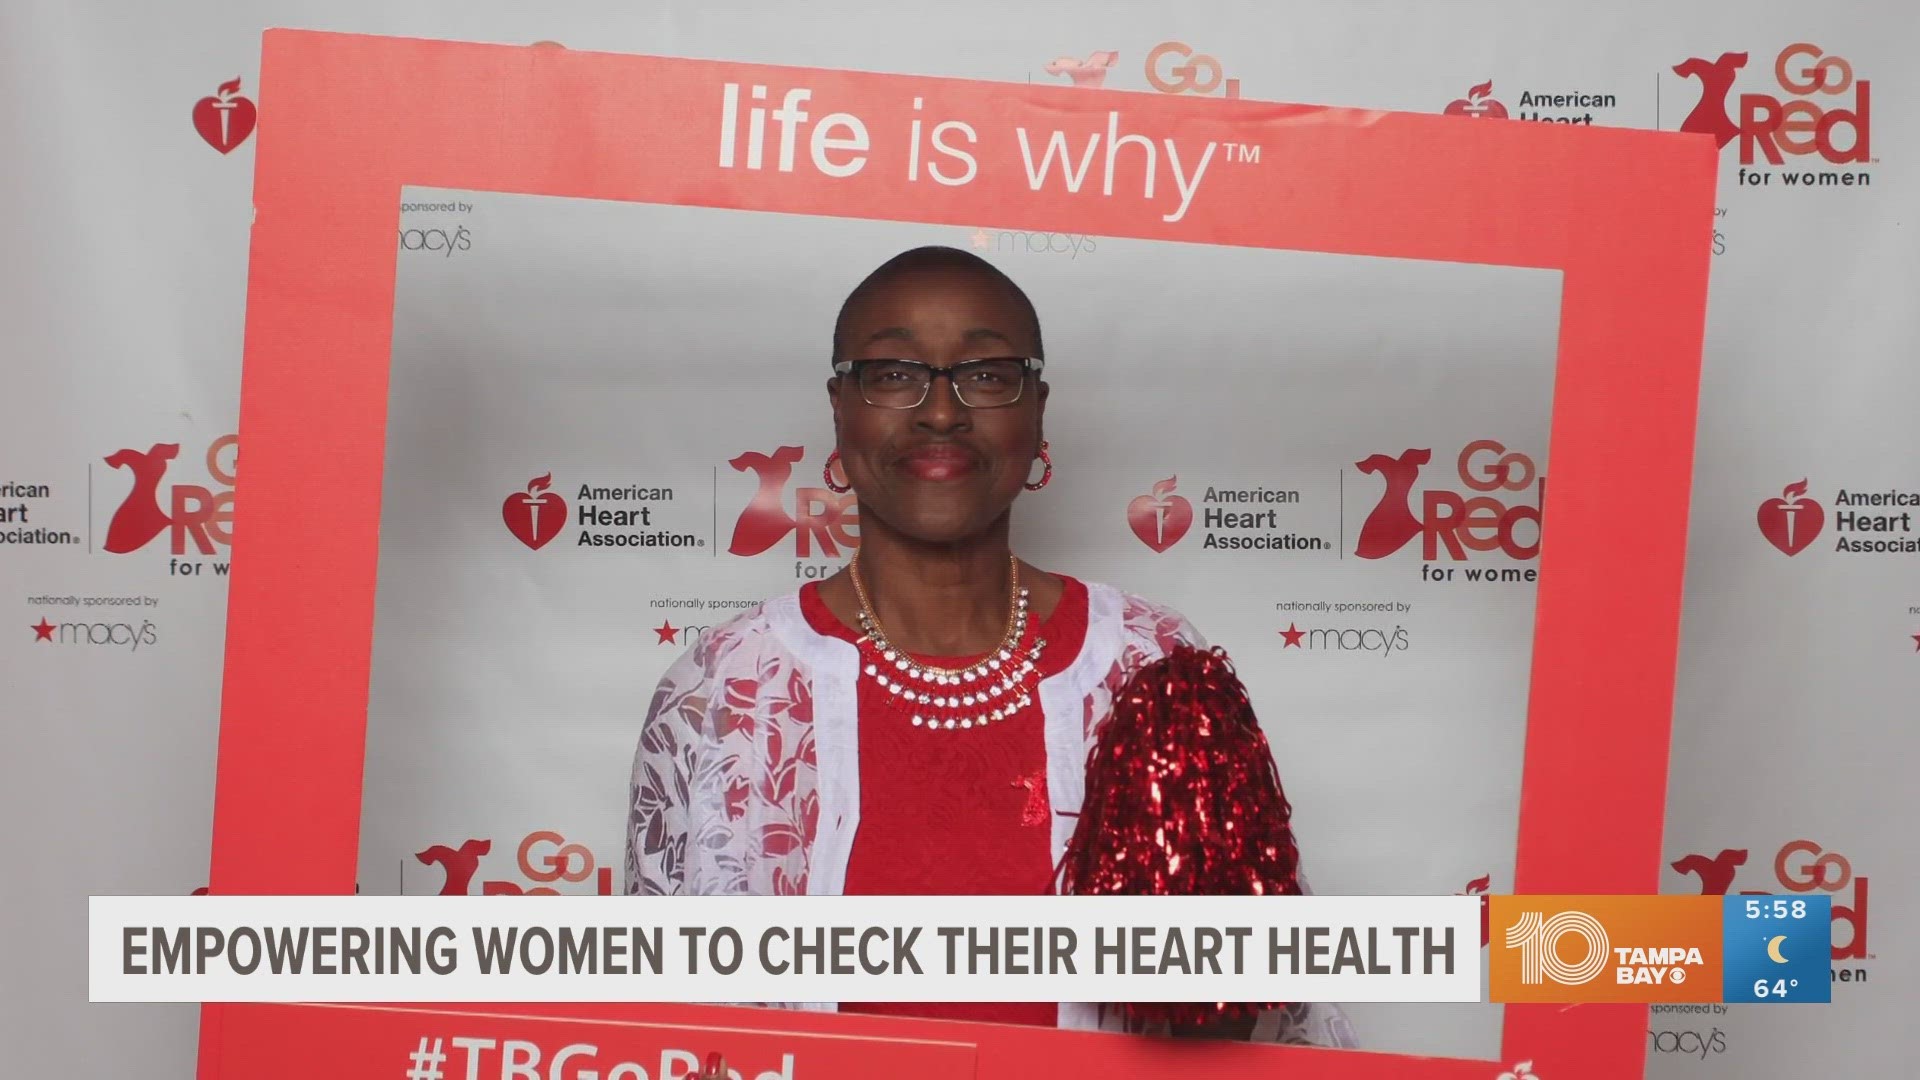 Ruby Hope said the lessons she has learned from what her health has been through can raise awareness for others to be proactive about their health.